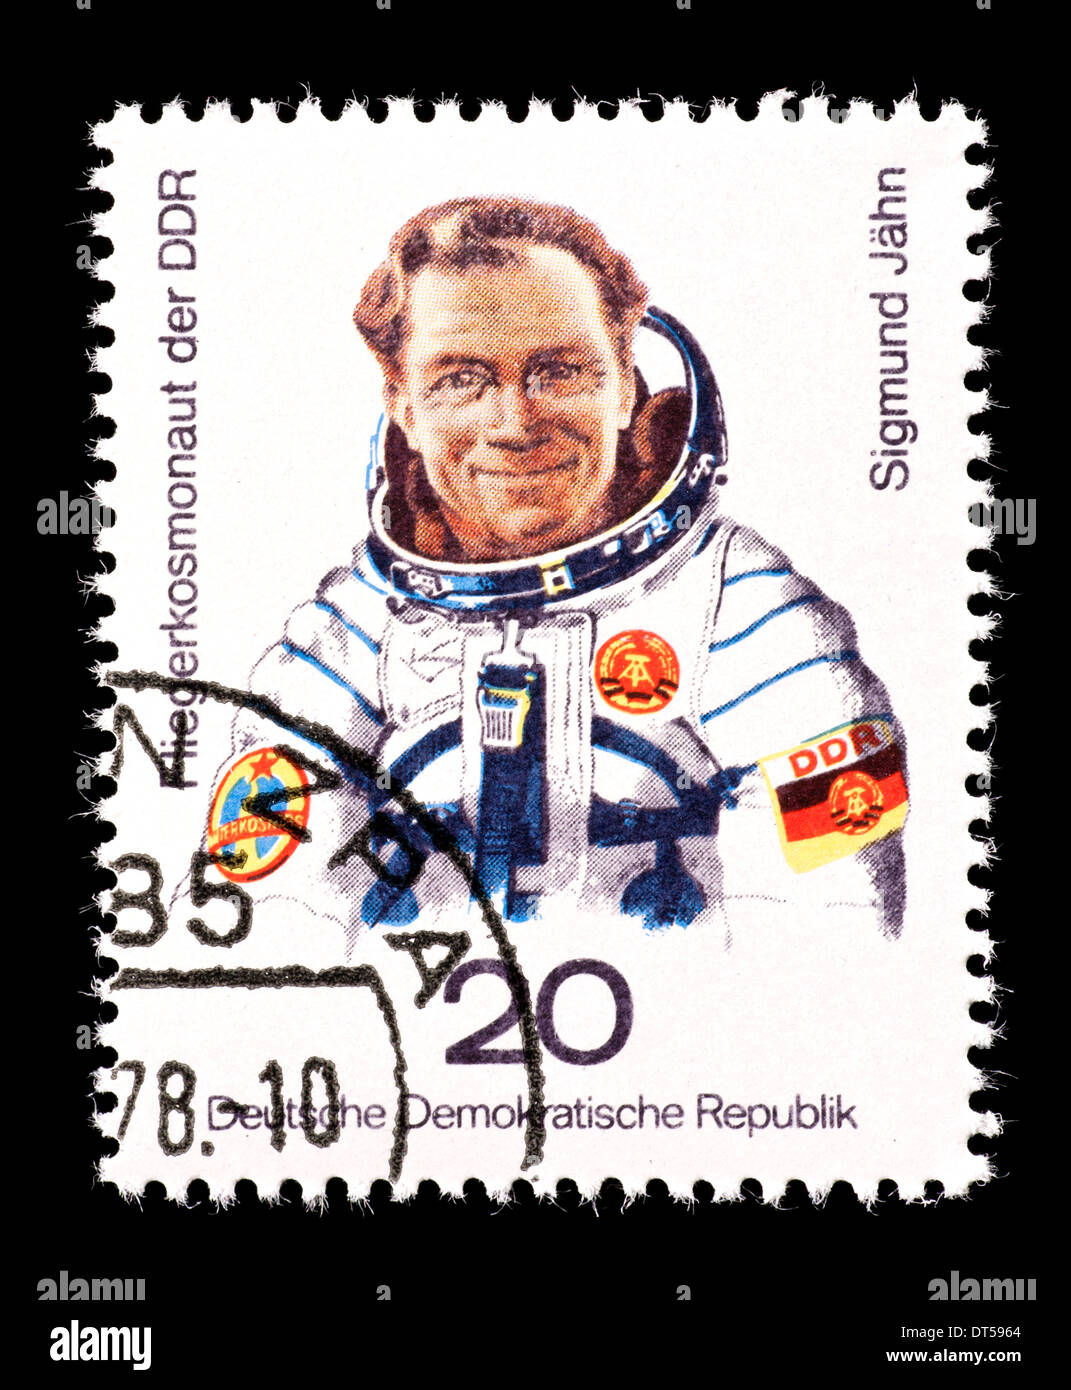 Postage stamp from East Germany (DDR) depicting Sigmund Werner Jahn, first German in space. Stock Photo